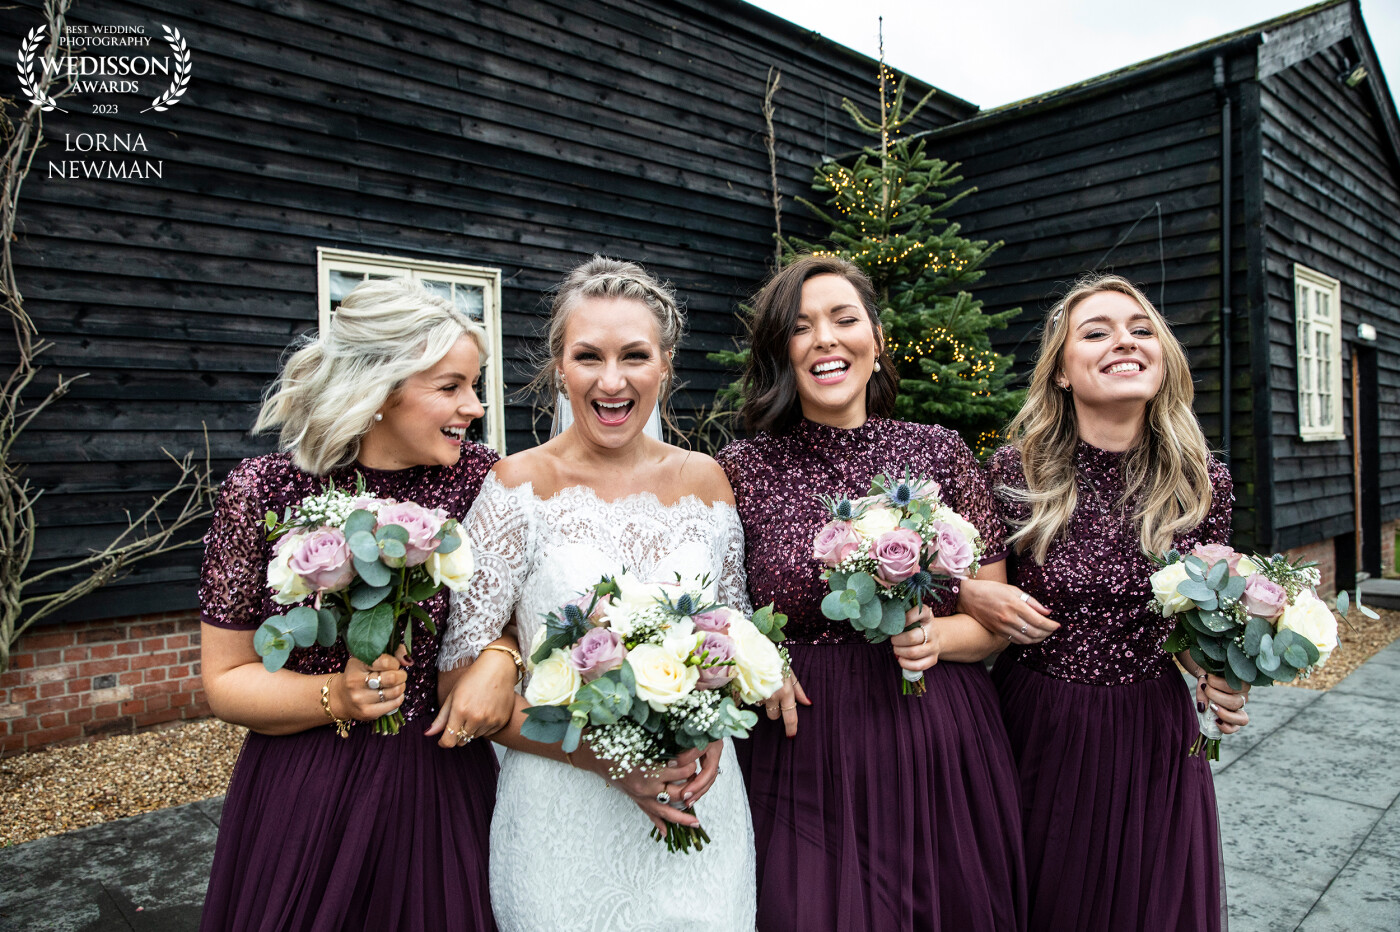 Tanya and her bridemaids having some fun during the group shots at Millin Barn. Congratulations guys !